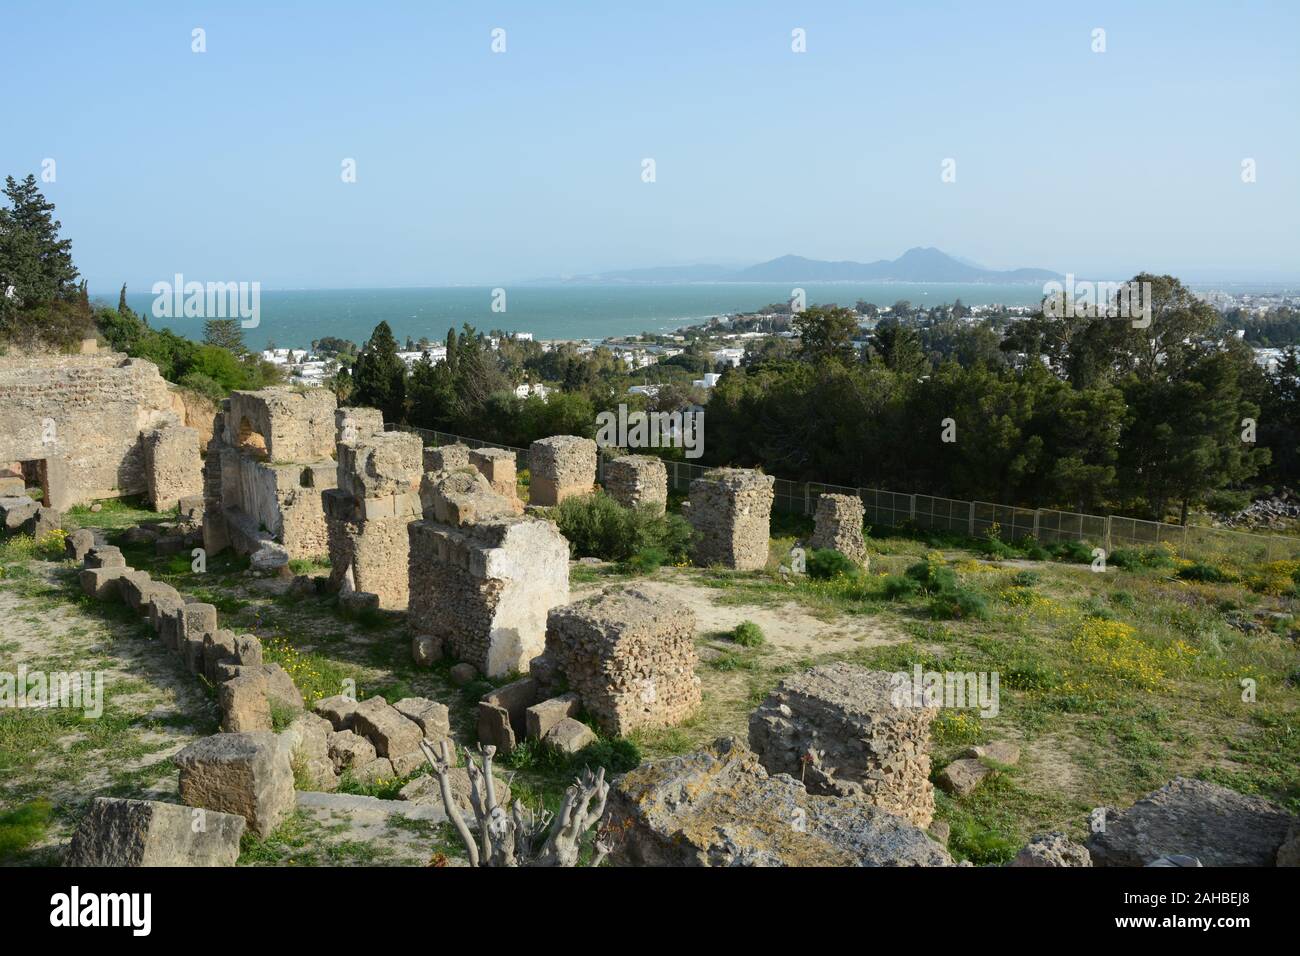 The old Punic (Carthaginian) archaeological ruins at Byrsa Hill in the posh Tunis suburb of Carthage, on the Mediterranean coast of Tunisia. Stock Photo